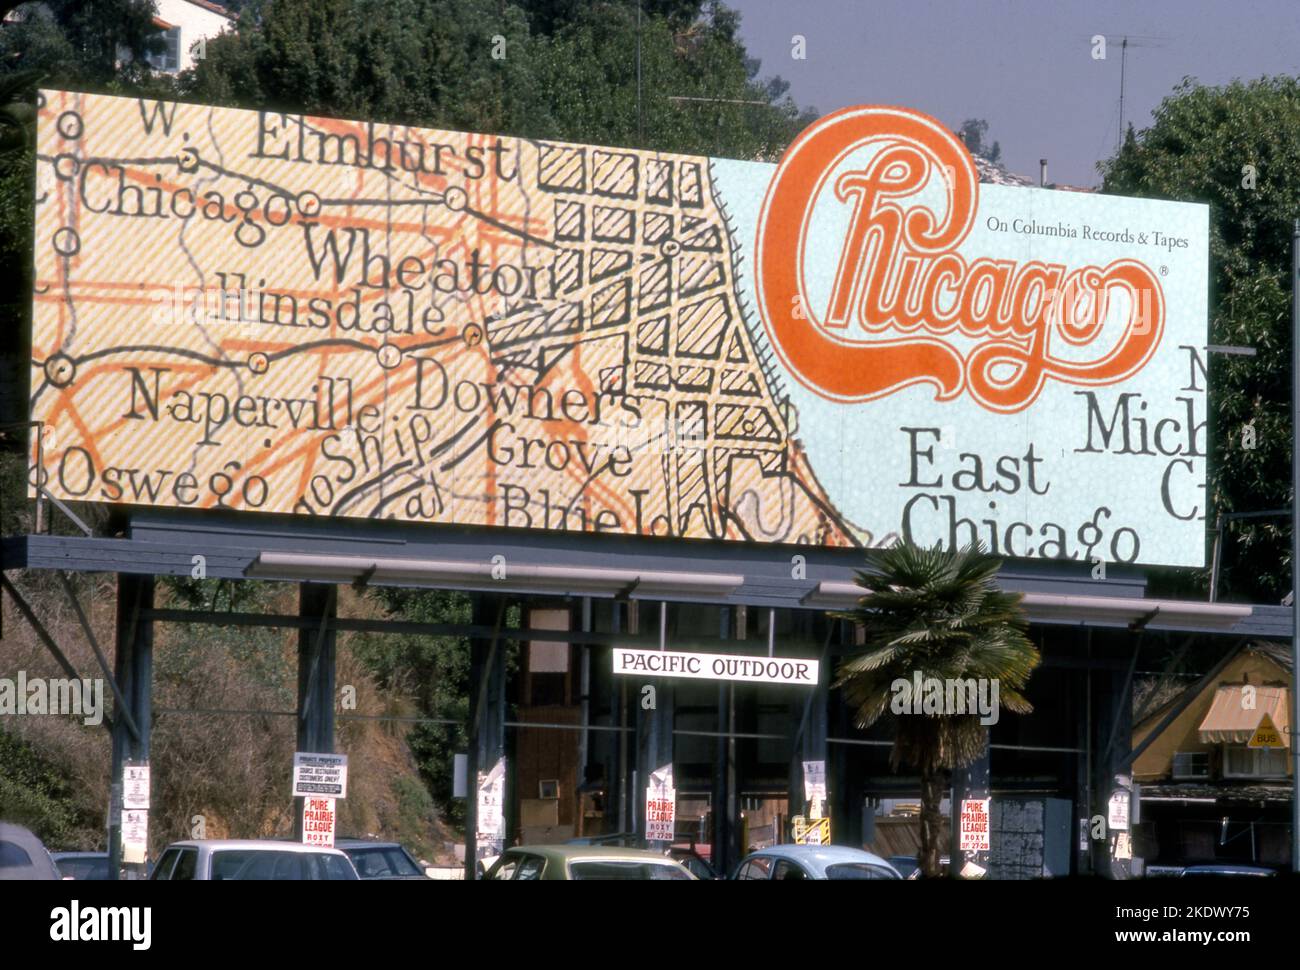 Chicago billboard on the Sunset Strip in Los Angeles, CA for record Chicago XI released in 1977. Stock Photo